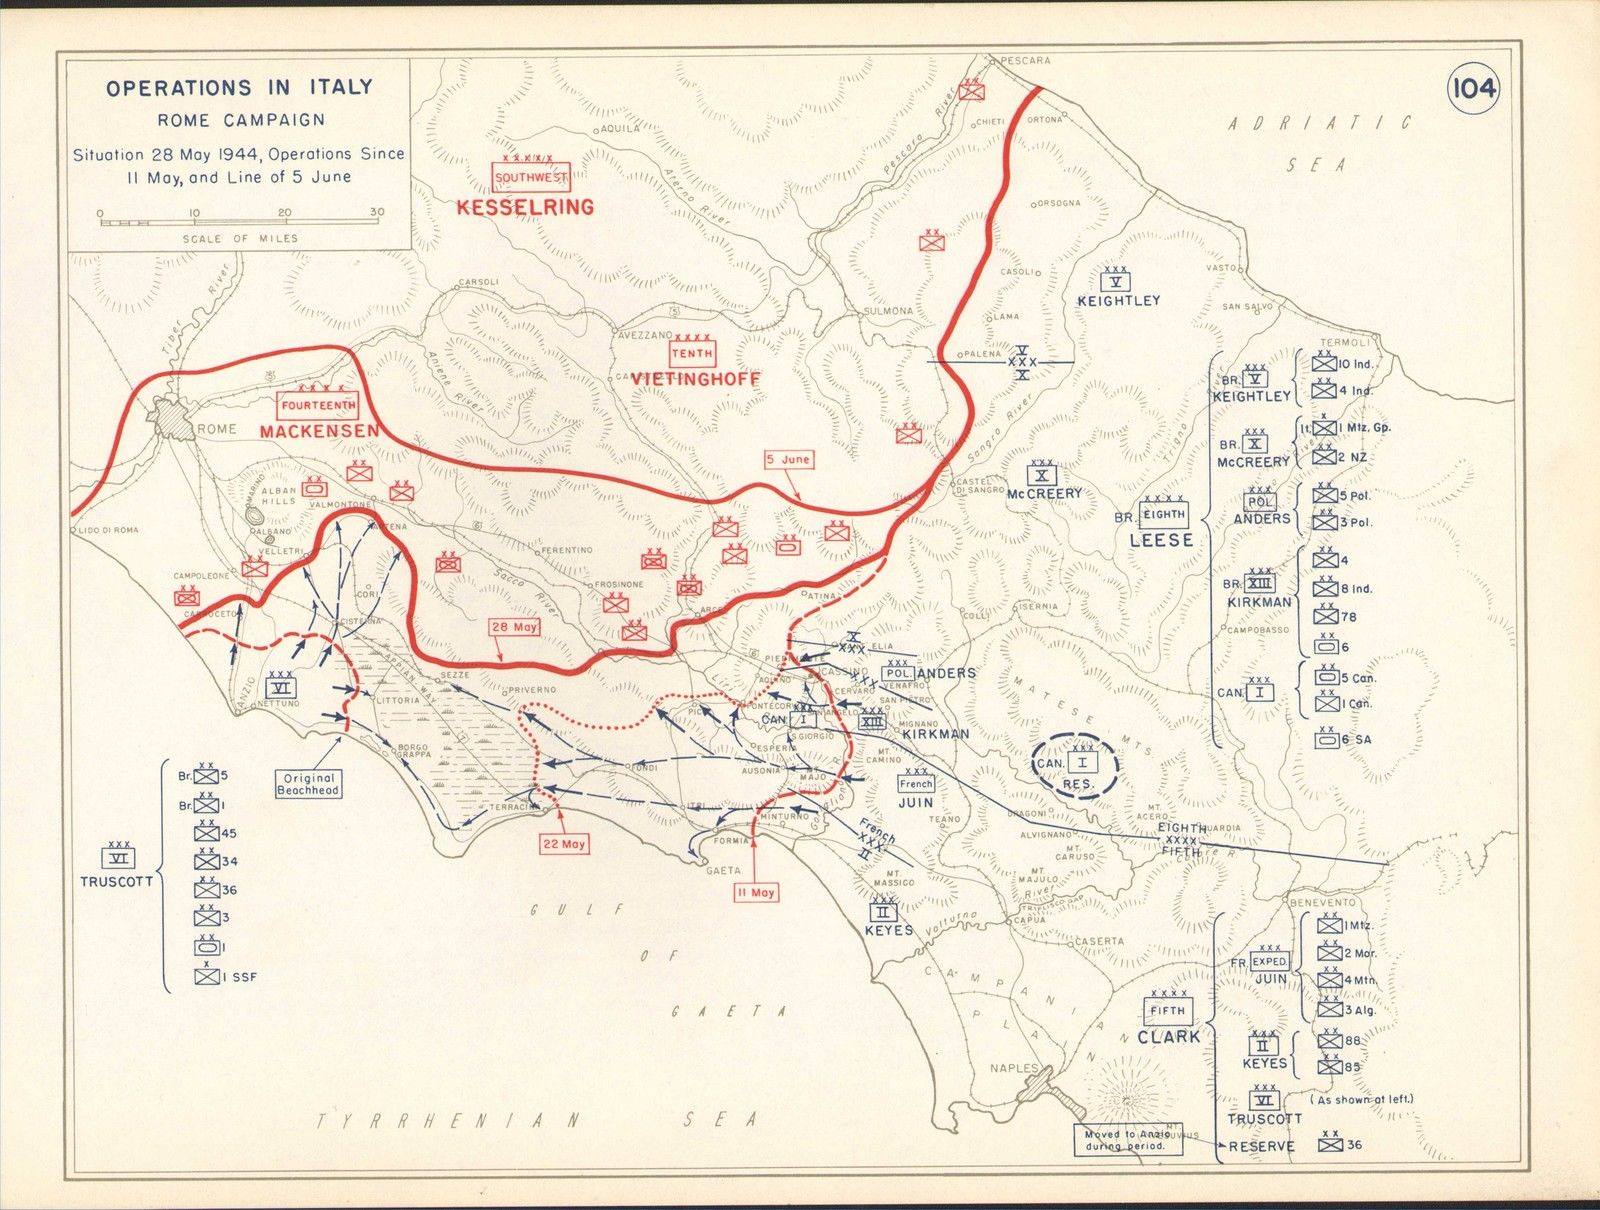 <p class='eng'>OPERATIONS IN ITALY - ROME CAMPAIGN. Situation 28 May 1944. Operations Since 11 May, Line of 5 June.</p>